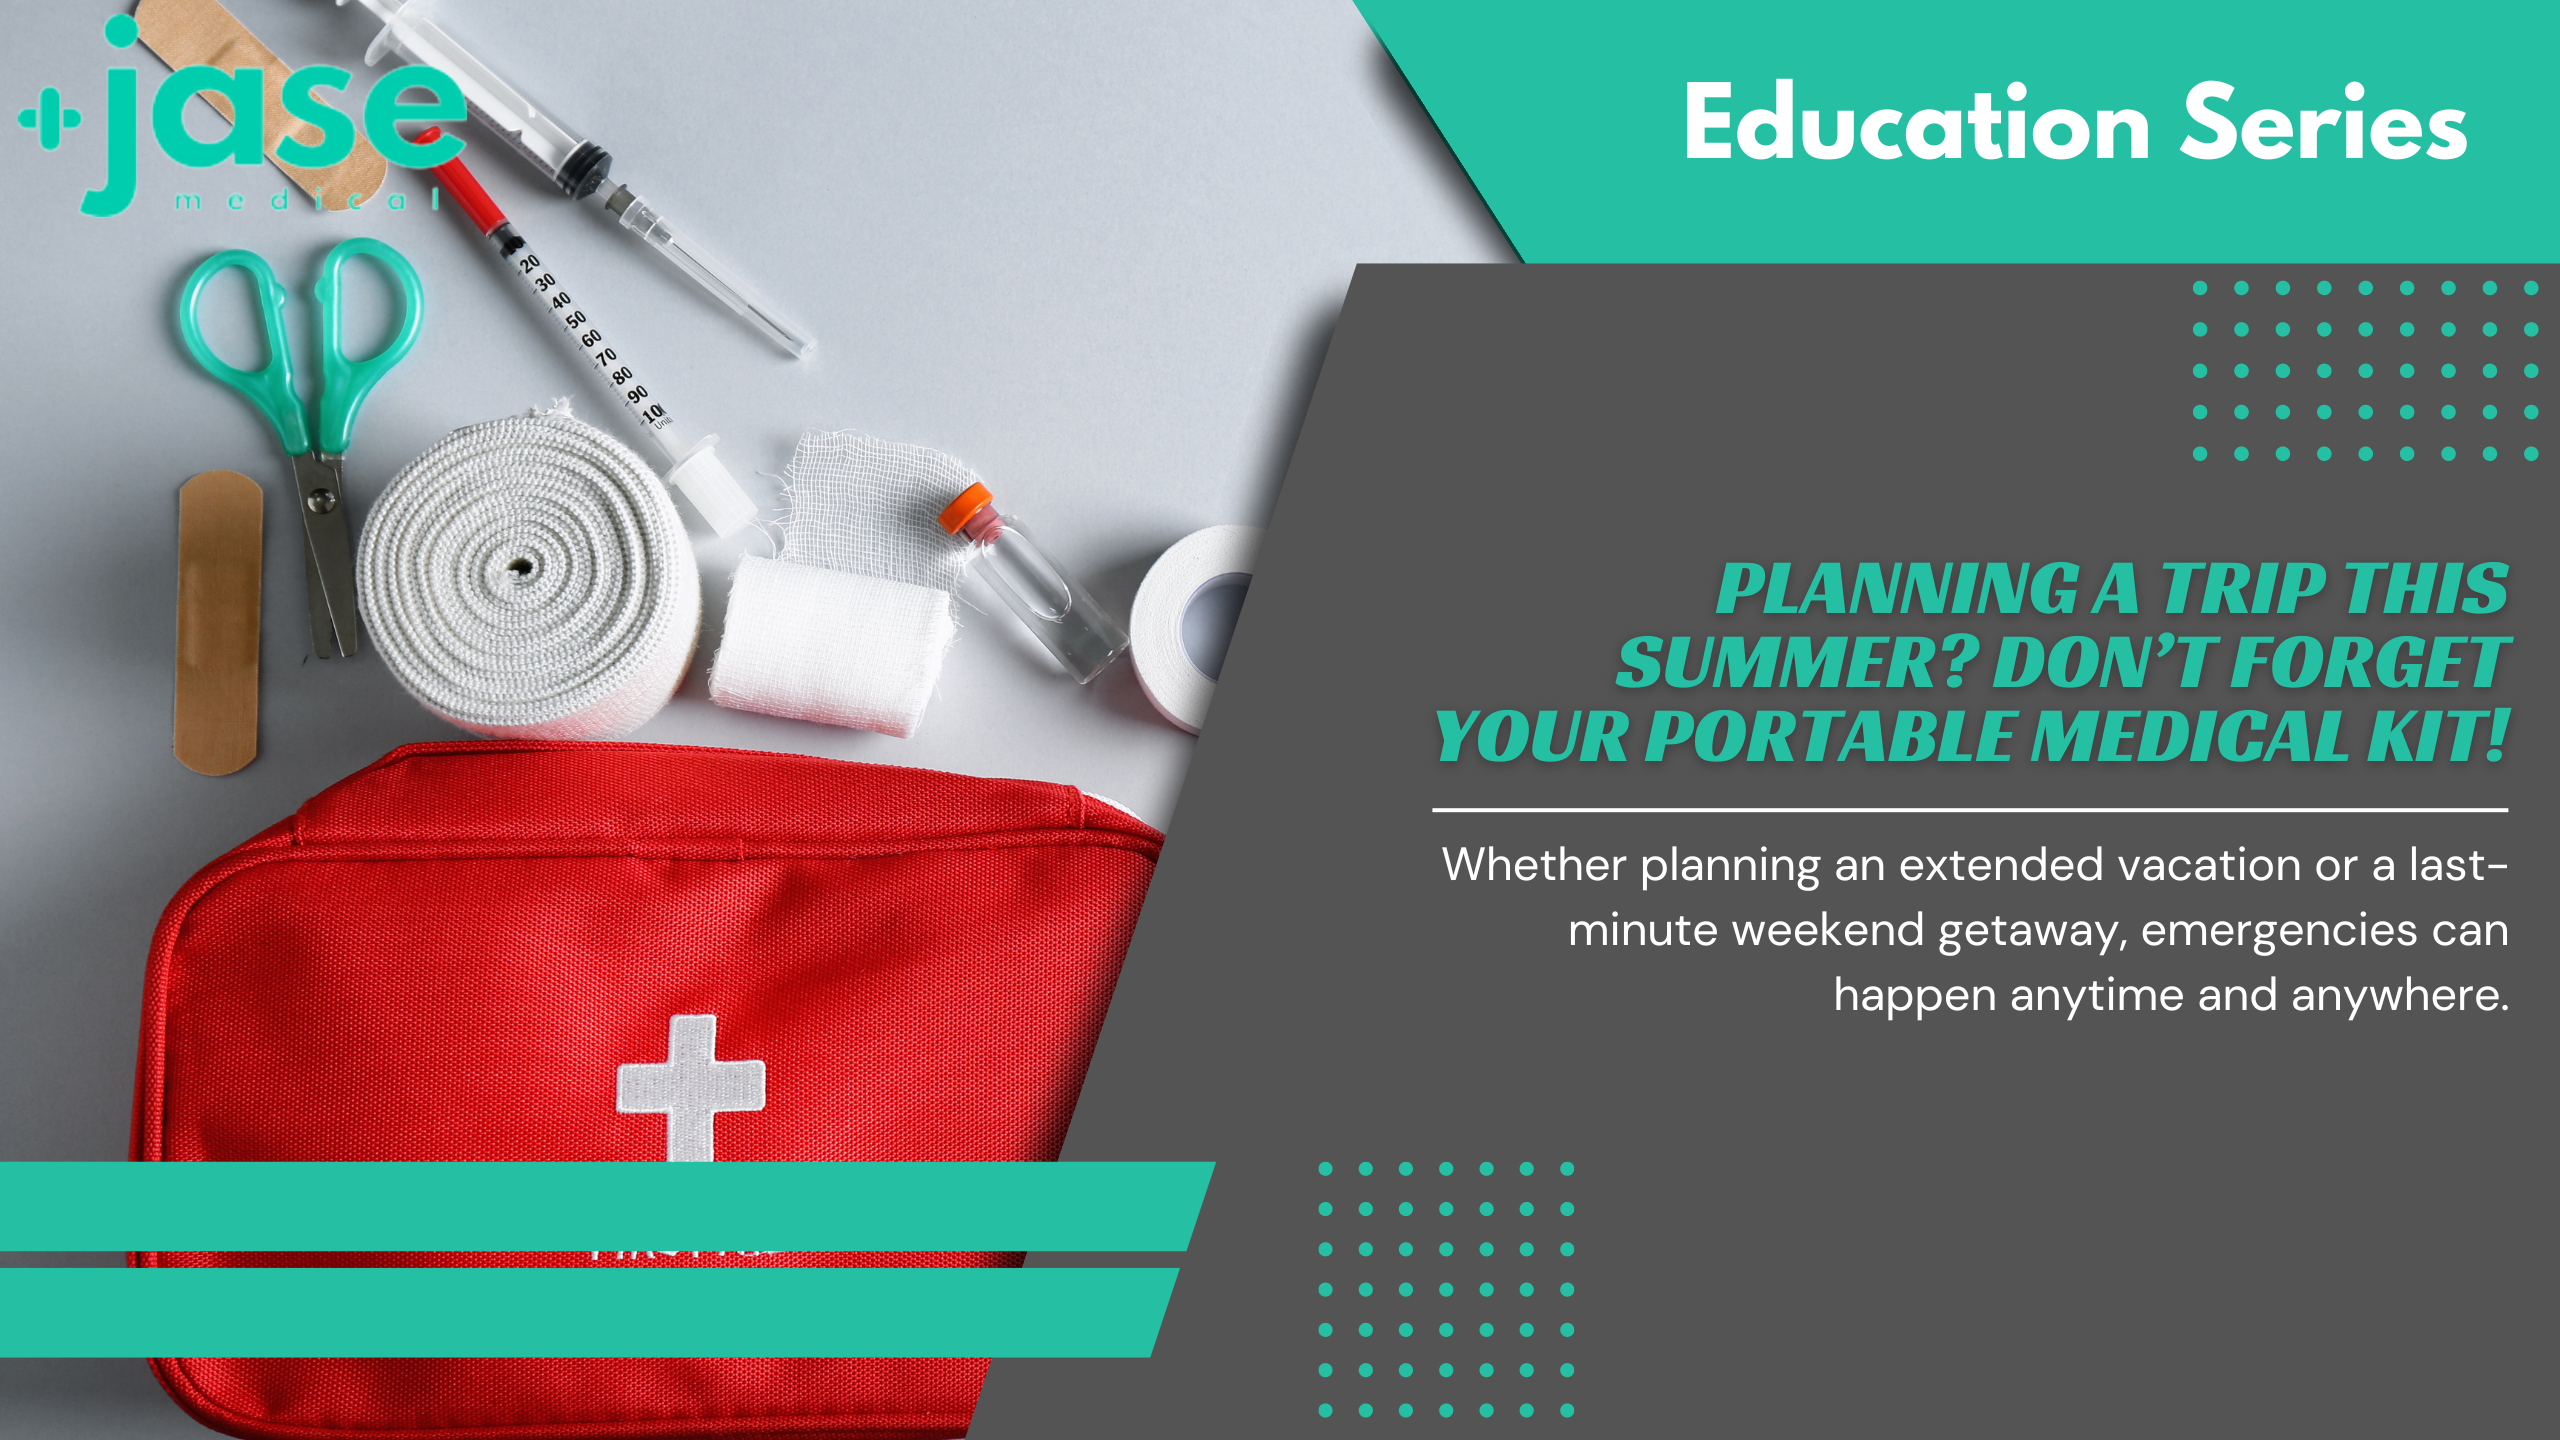 Planning a Trip This Summer? Don’t forget your Portable Medical Kit!